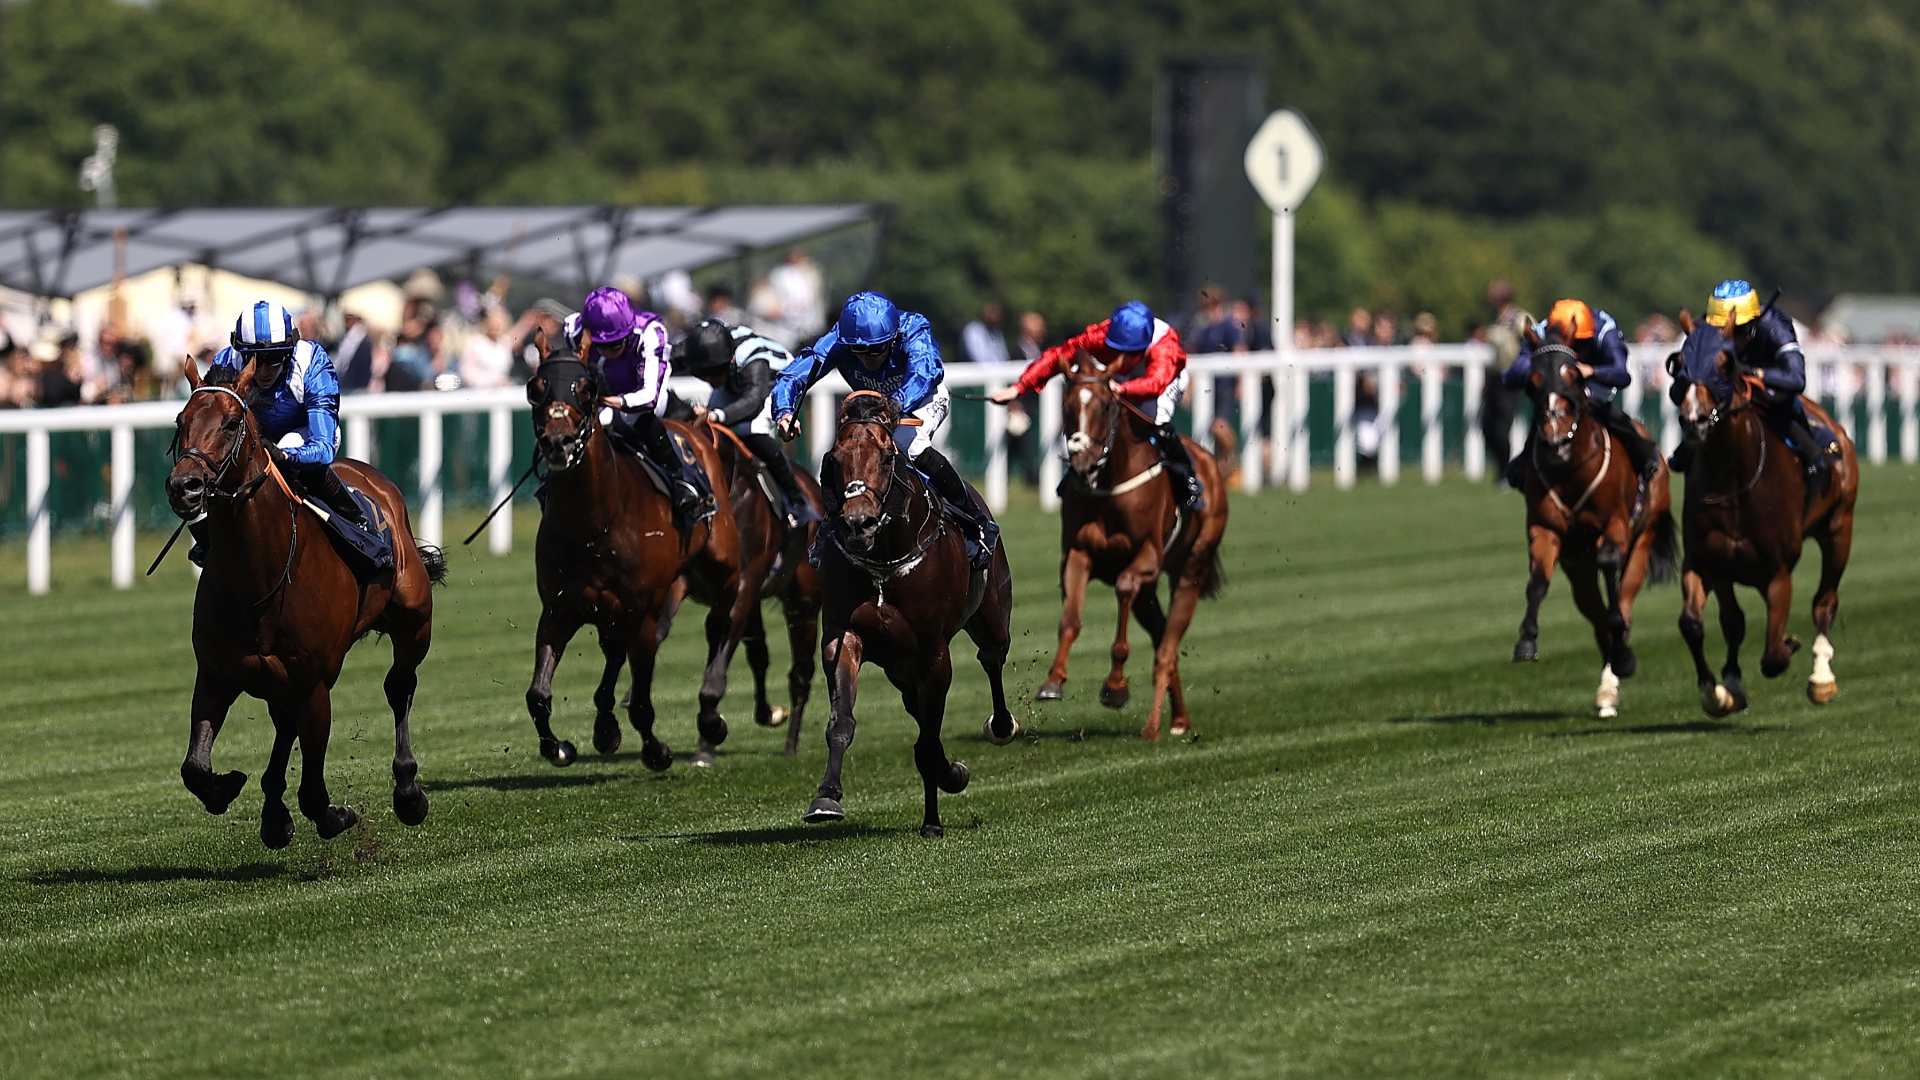 Queen Anne Stakes Live Stream Watch the Royal Ascot race online